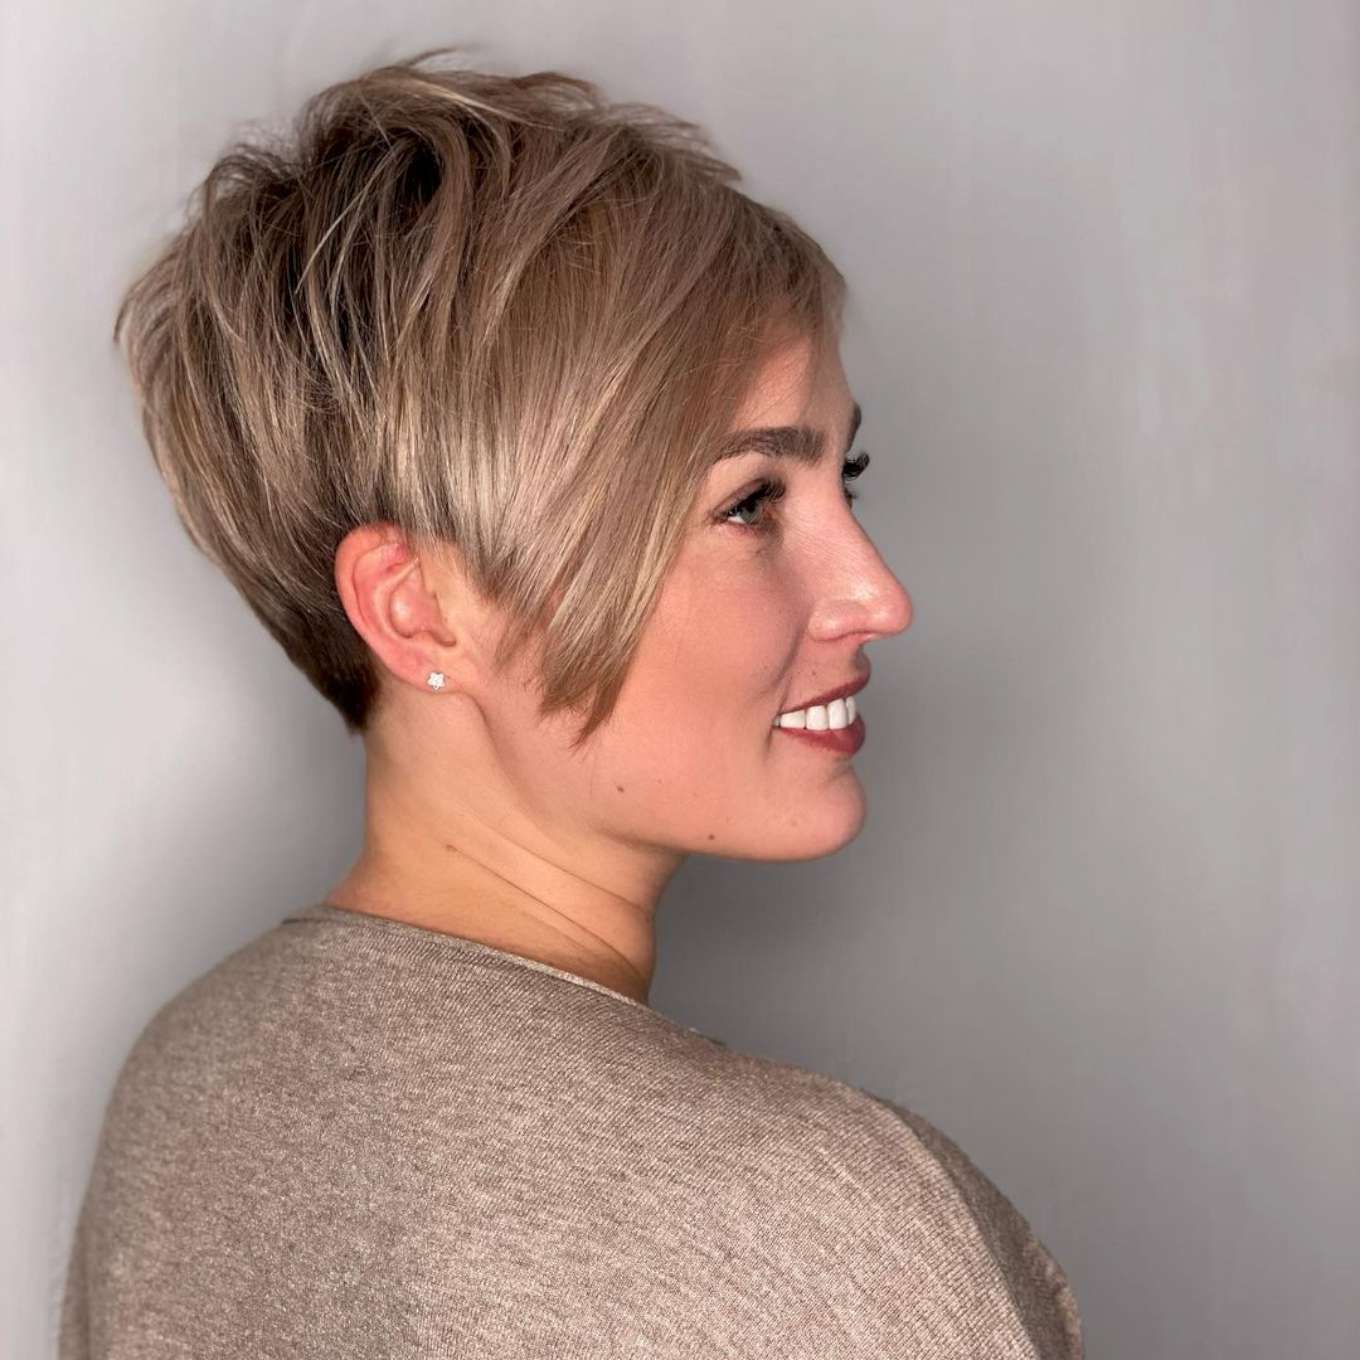 Wendy Bailey Short Hairstyles – 1